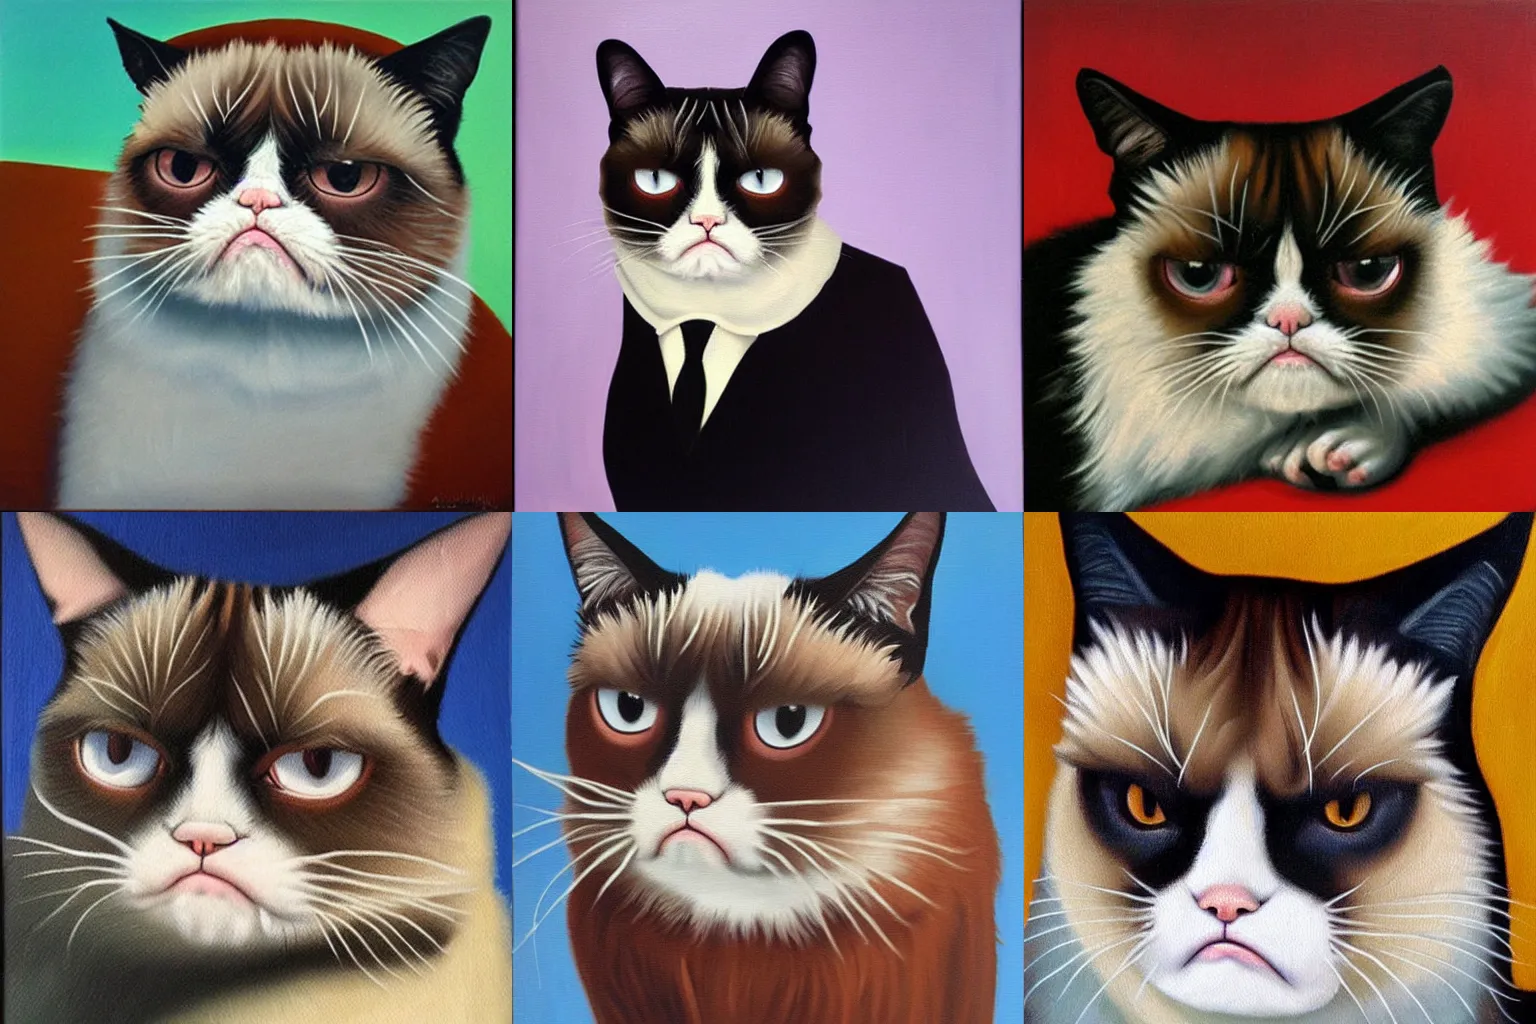 Grumpy Angry Cat Illustration Graphic by Topstar · Creative Fabrica